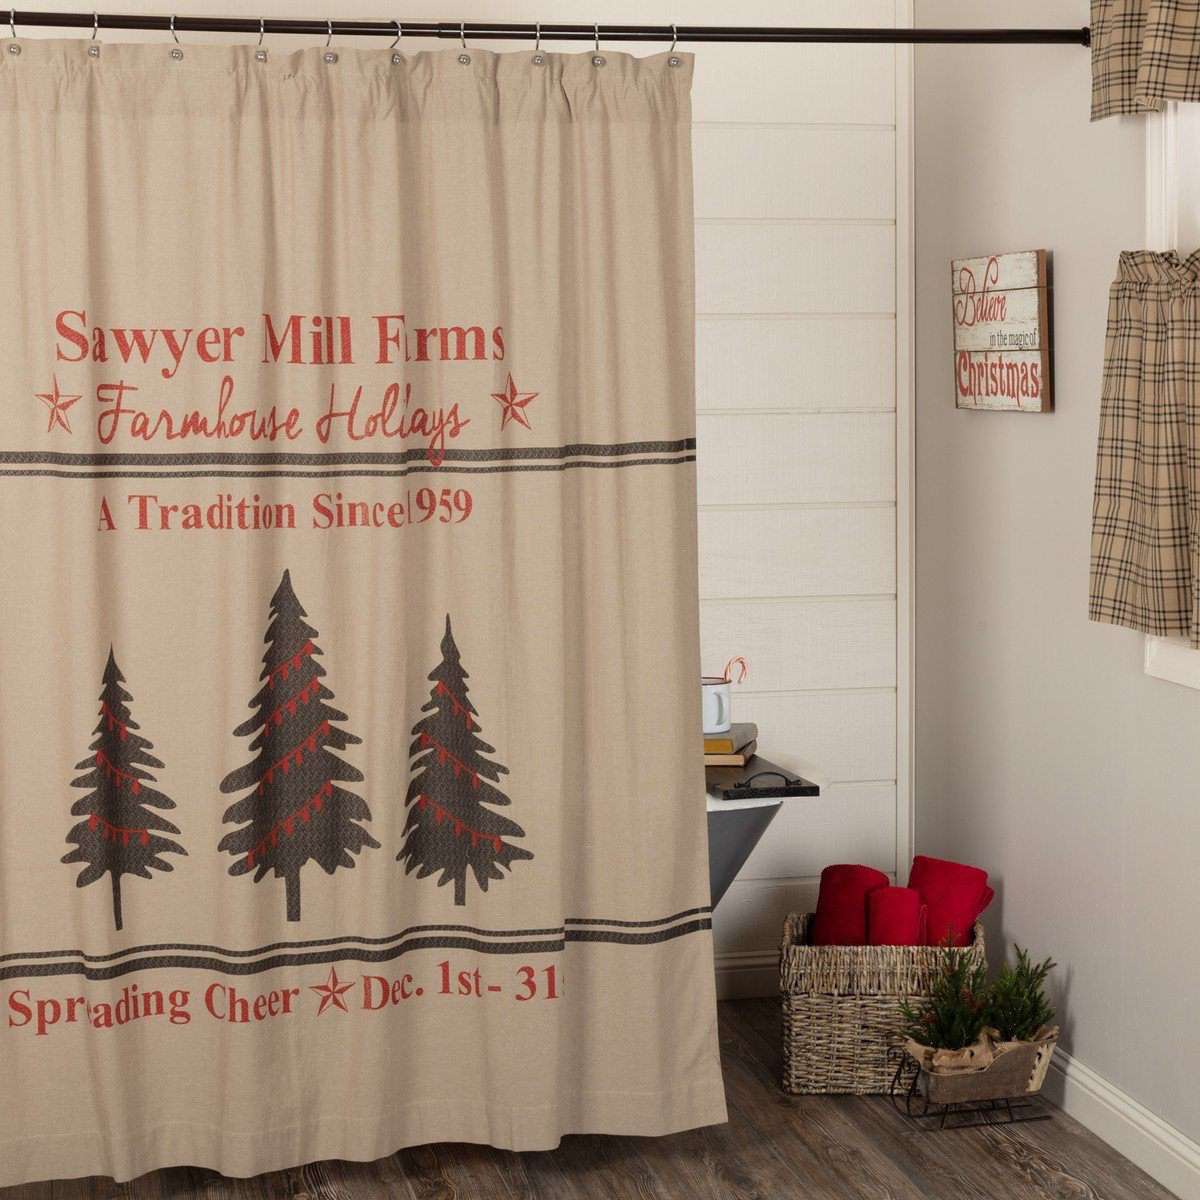 Sawyer Mill Holiday Tree Shower Curtain 72"x72" curtain VHC Brands 